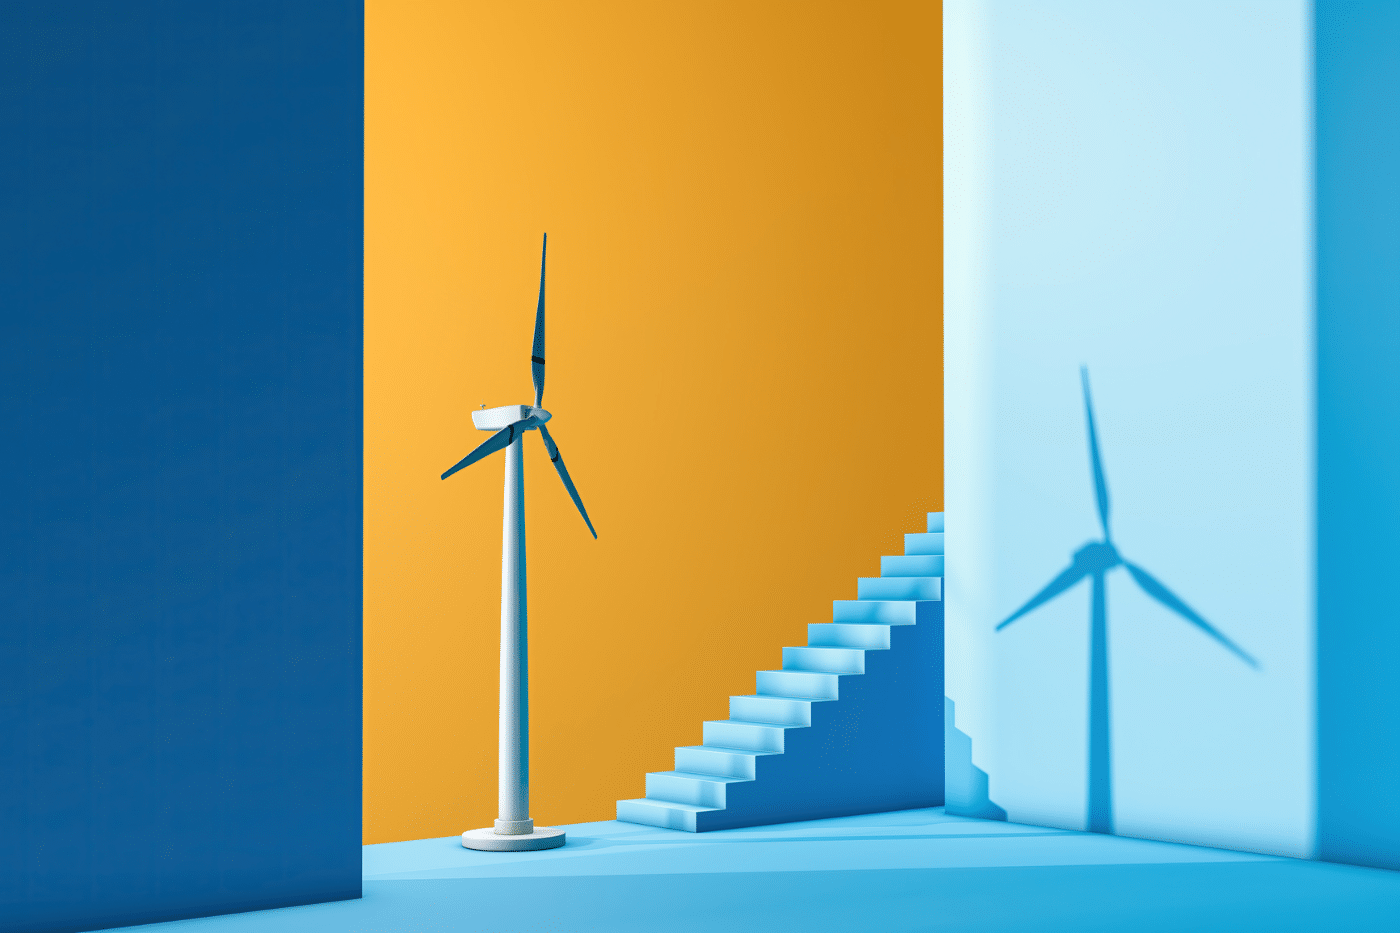 Modern sustainable energy windmill next to some stairs and on a yellow background